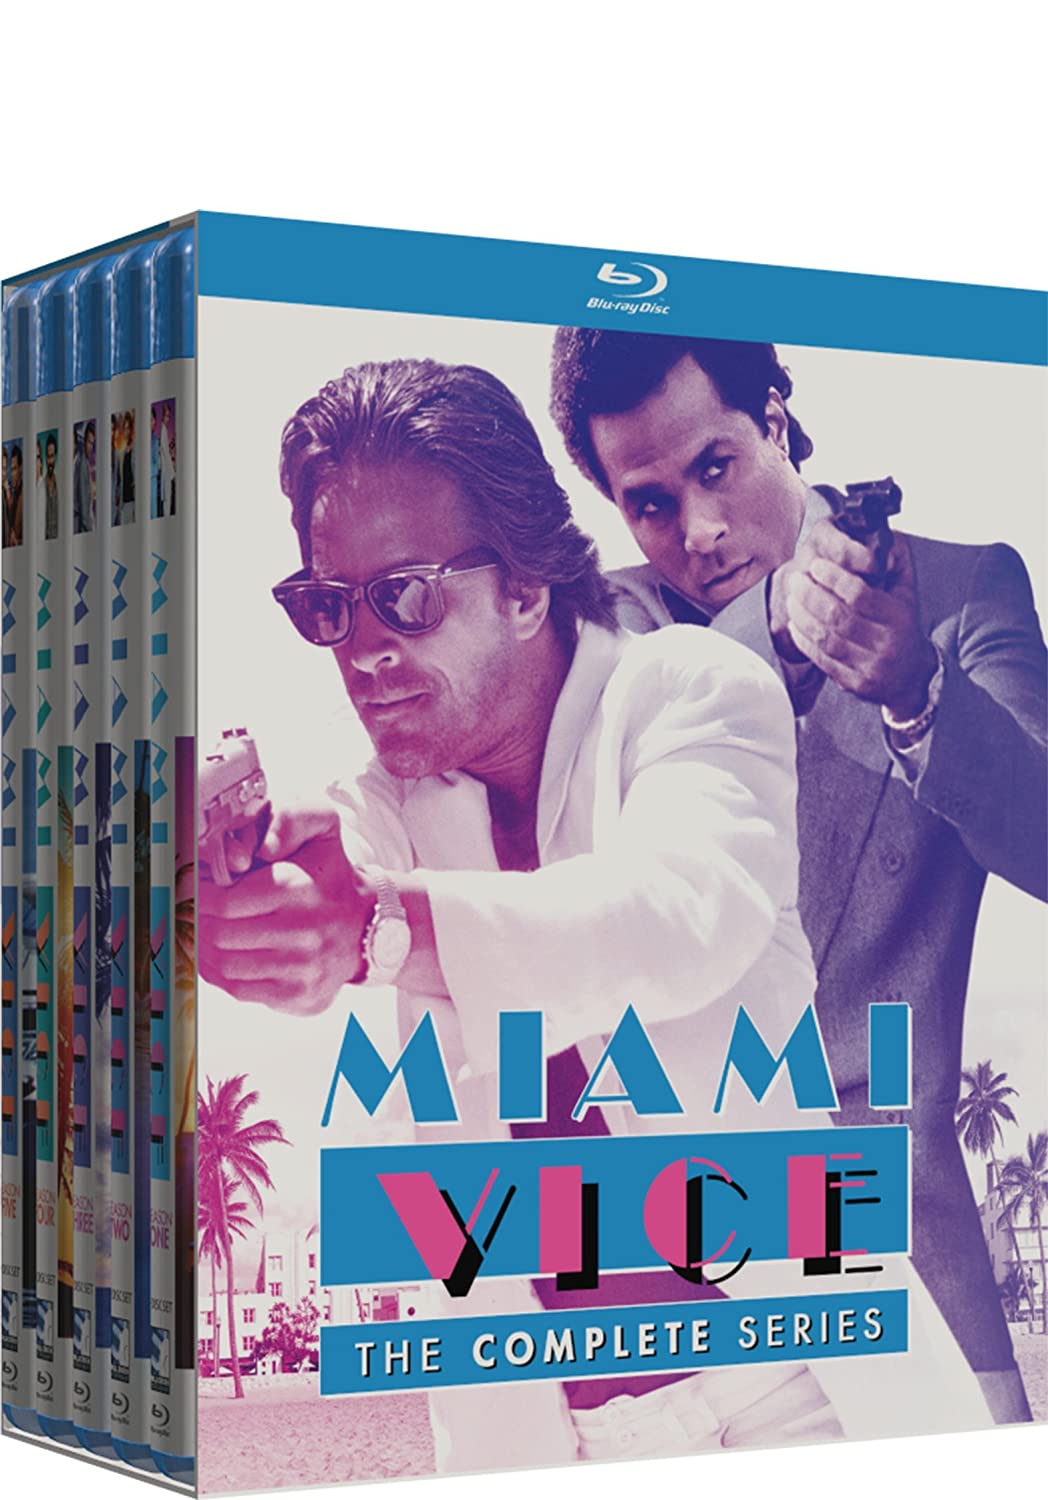 Miami Vice: The Complete Series (Blu-Ray) $29 + Free Shipping